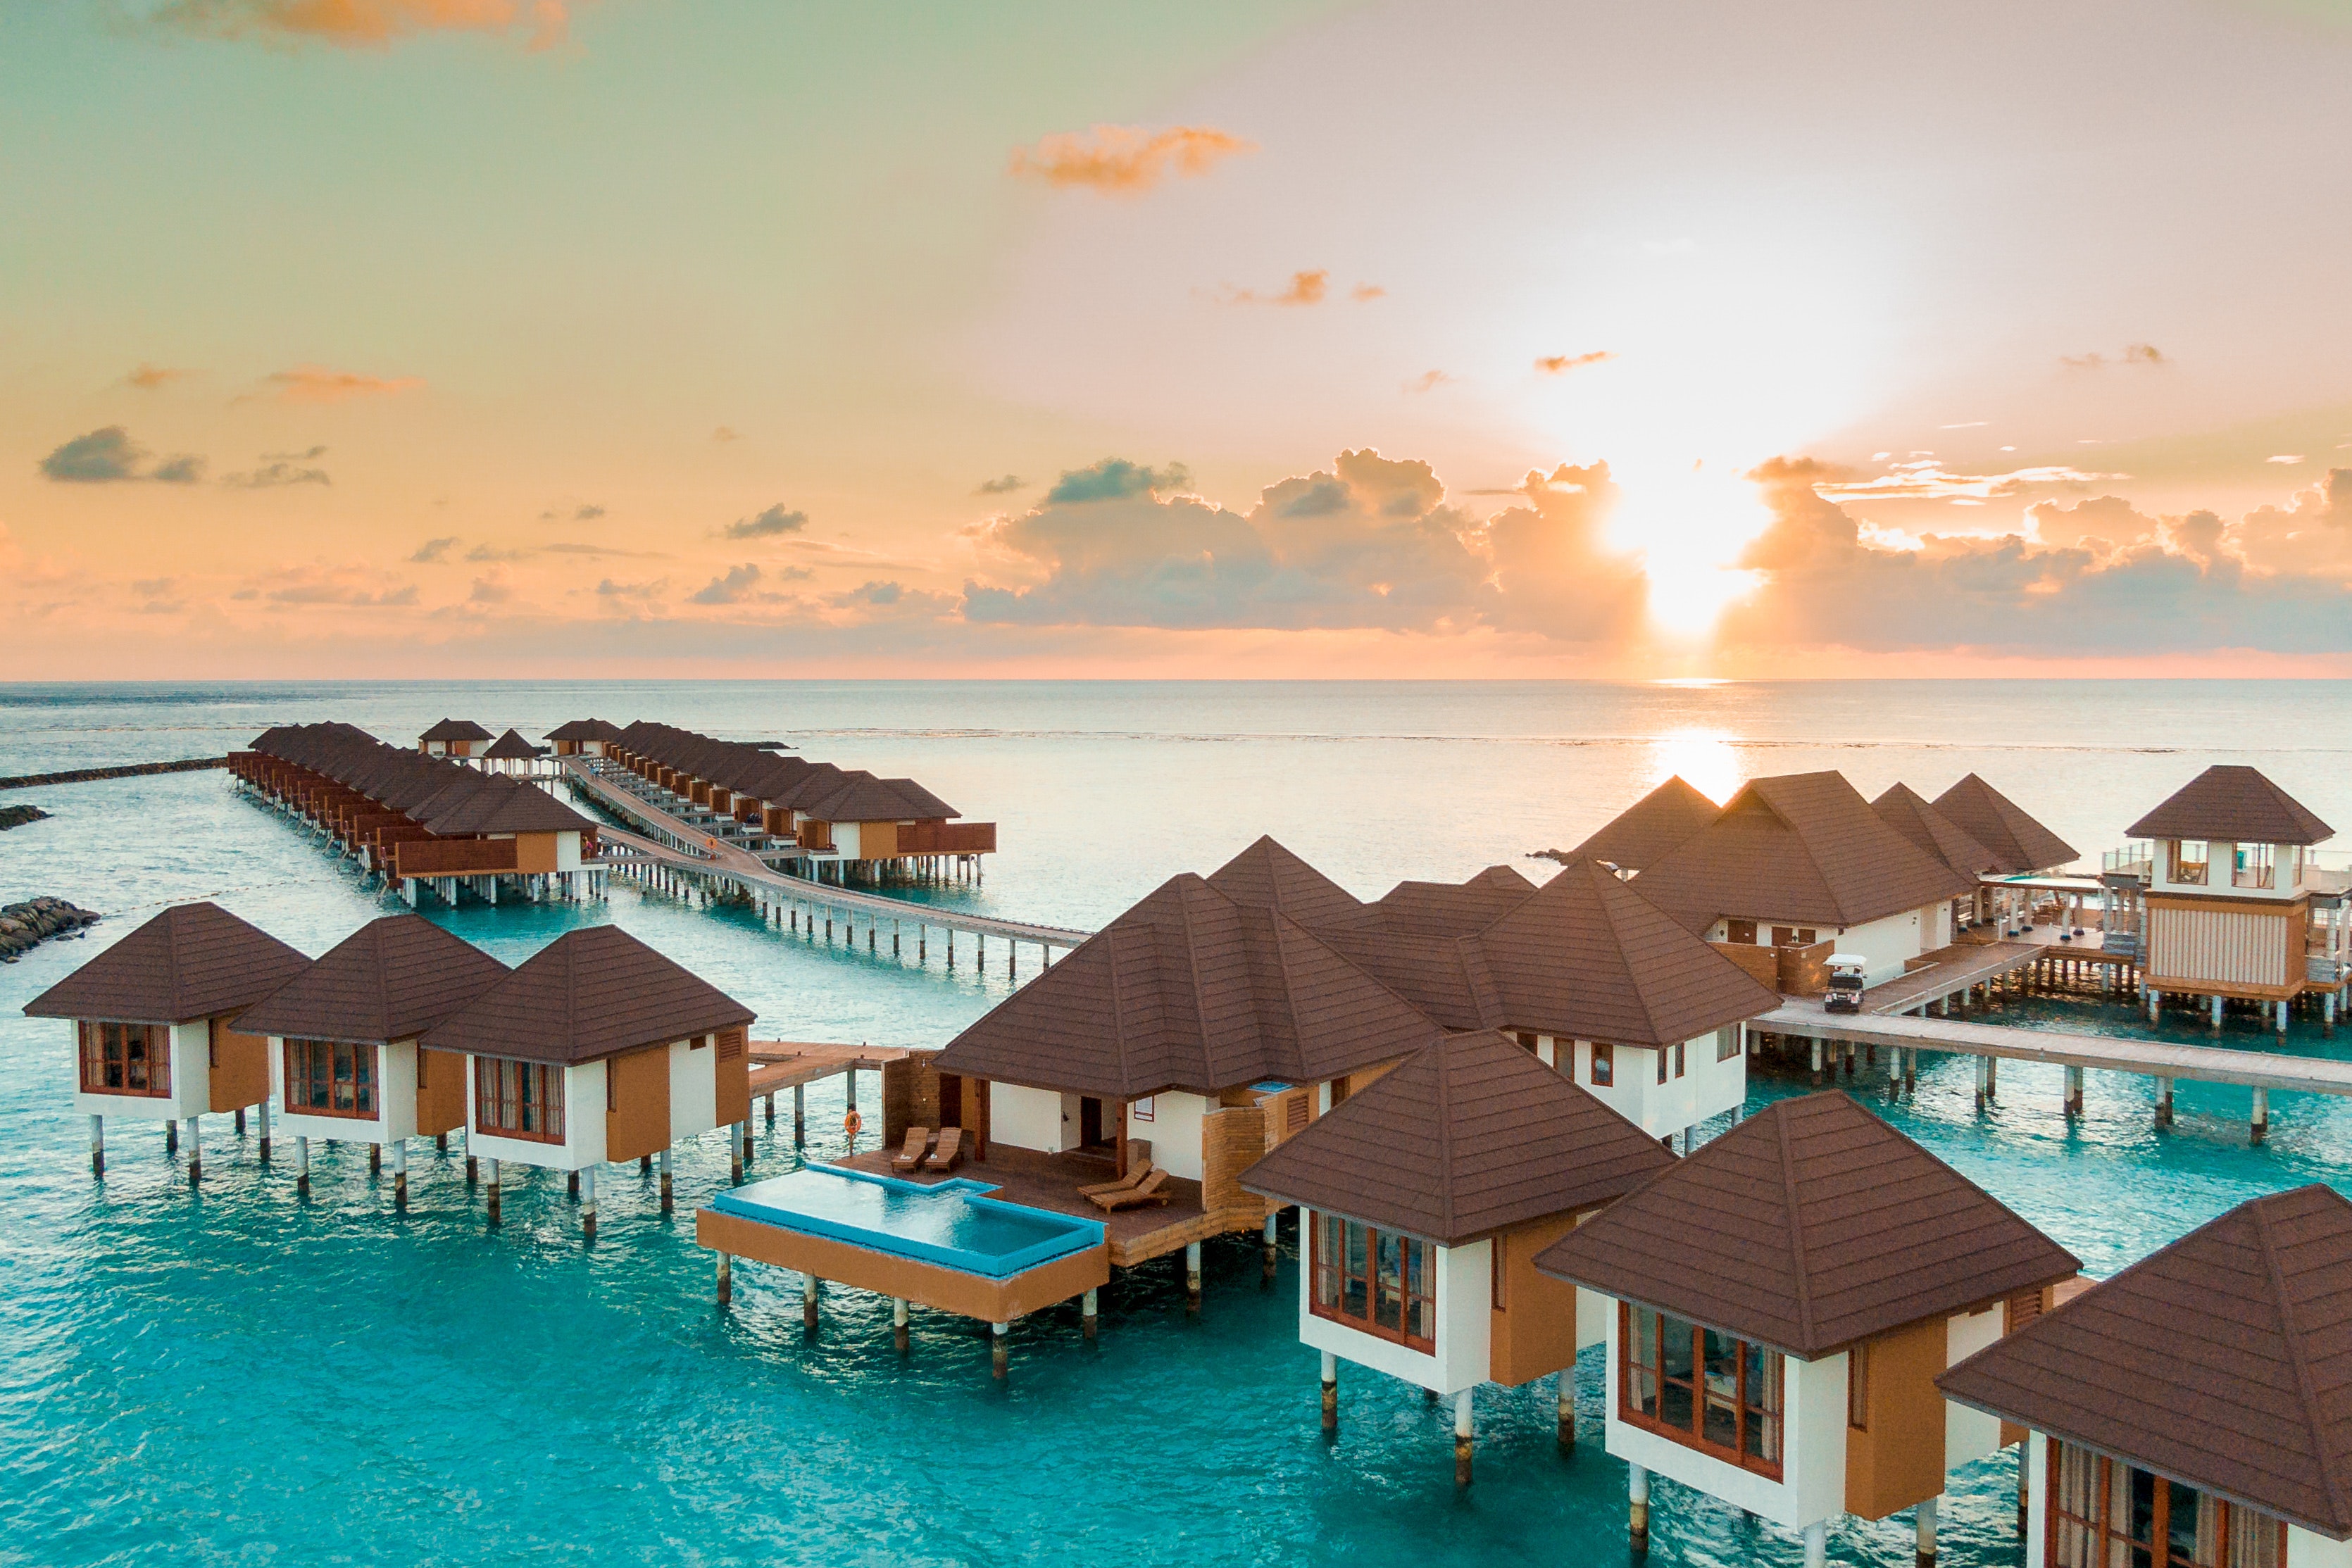 Maldives photos download the best free maldives stock photos hd images